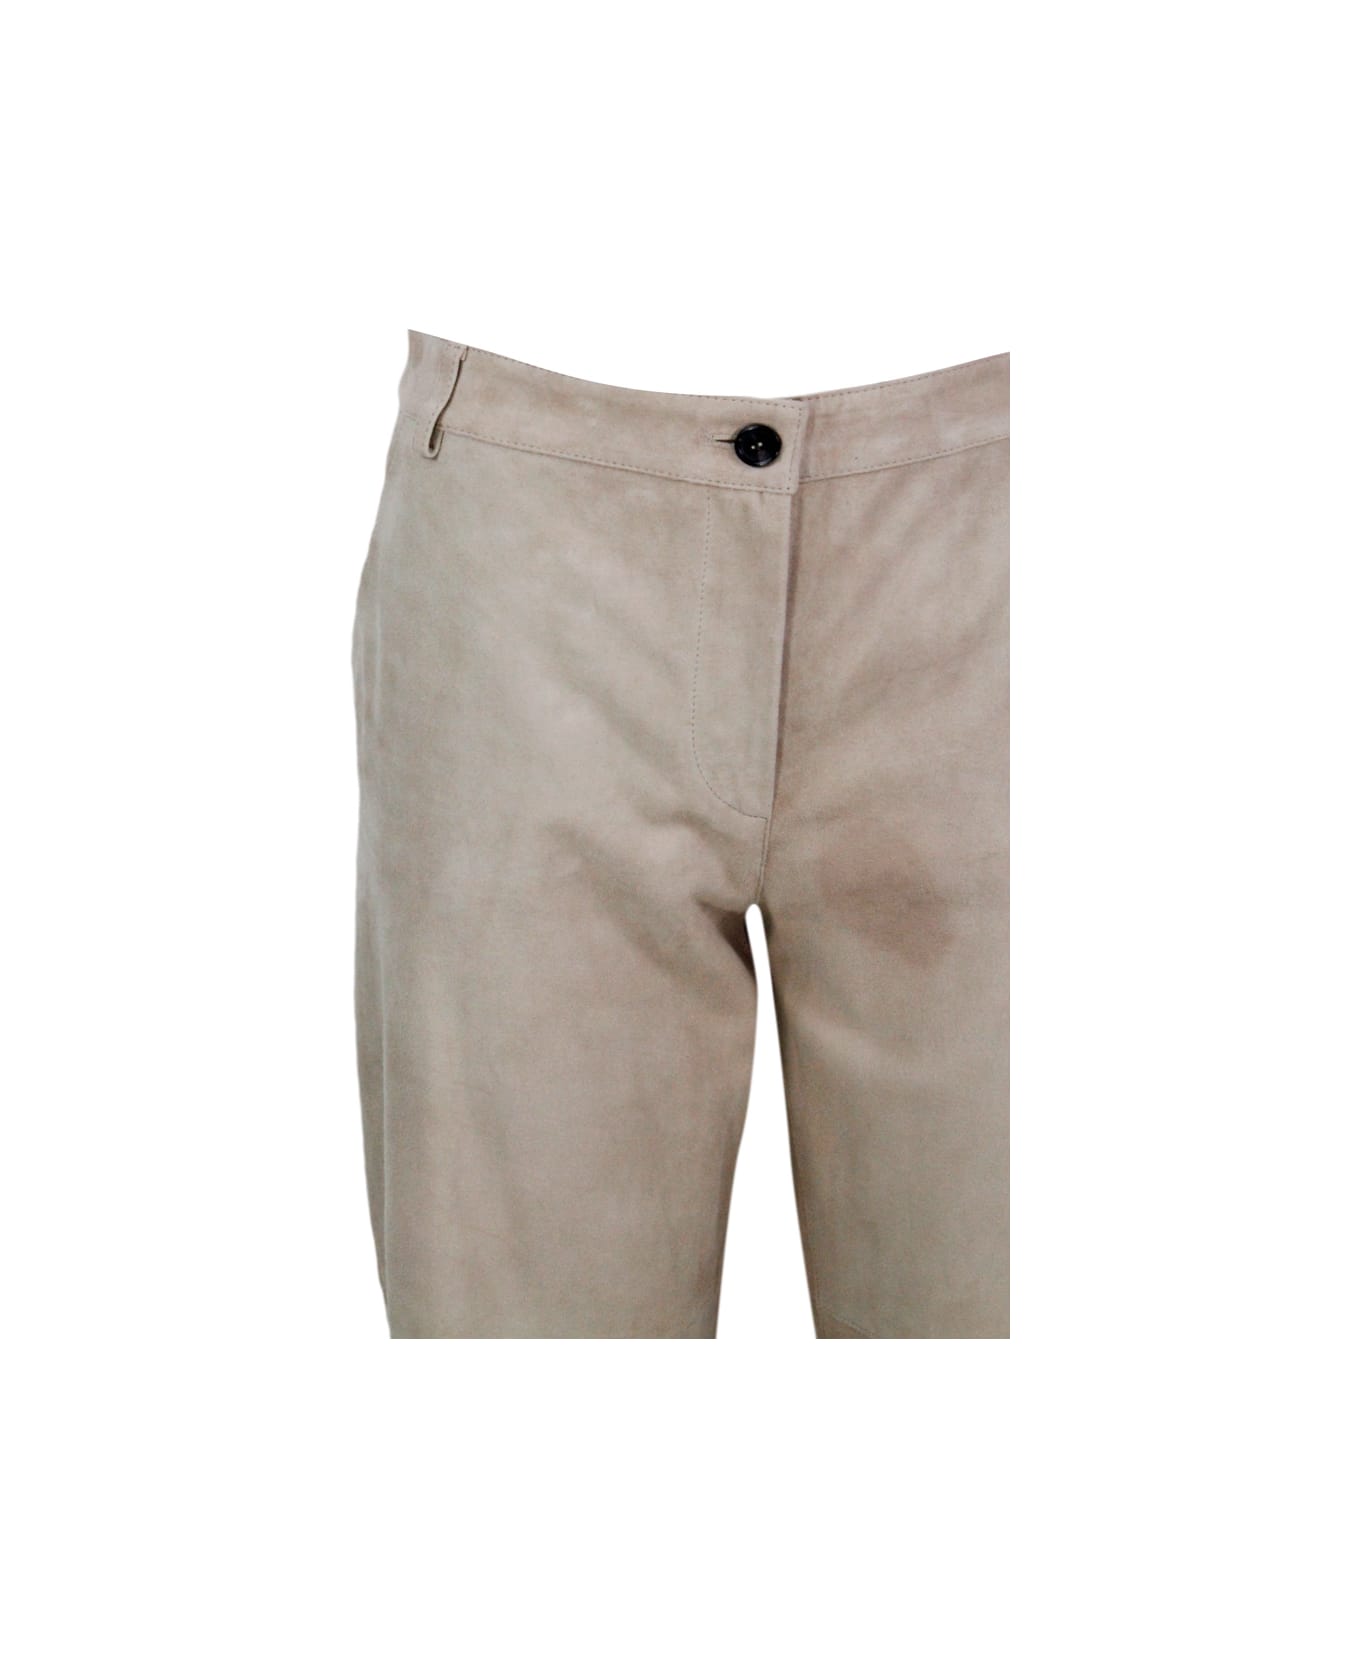 Antonelli Trousers Made Of Soft Suede, With A Soft Fit And Zip And Button Closure With Elastic Waist On The Back. Welt Pockets. - Beige